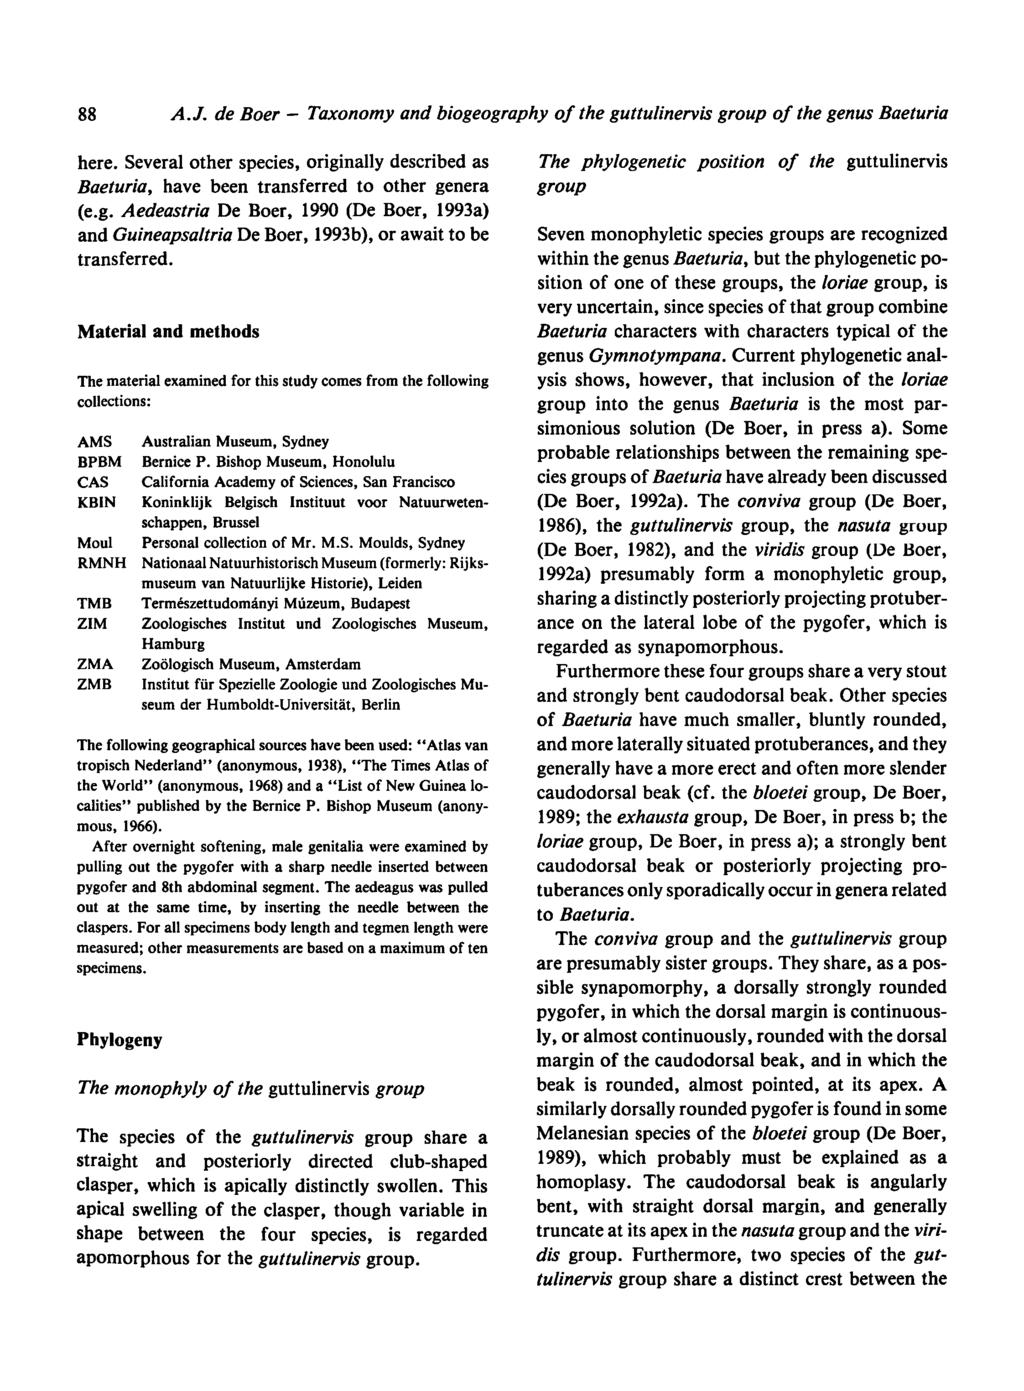 88 Taxonomy and biogeography of the guttulinervis group of the genus Baeturia here.